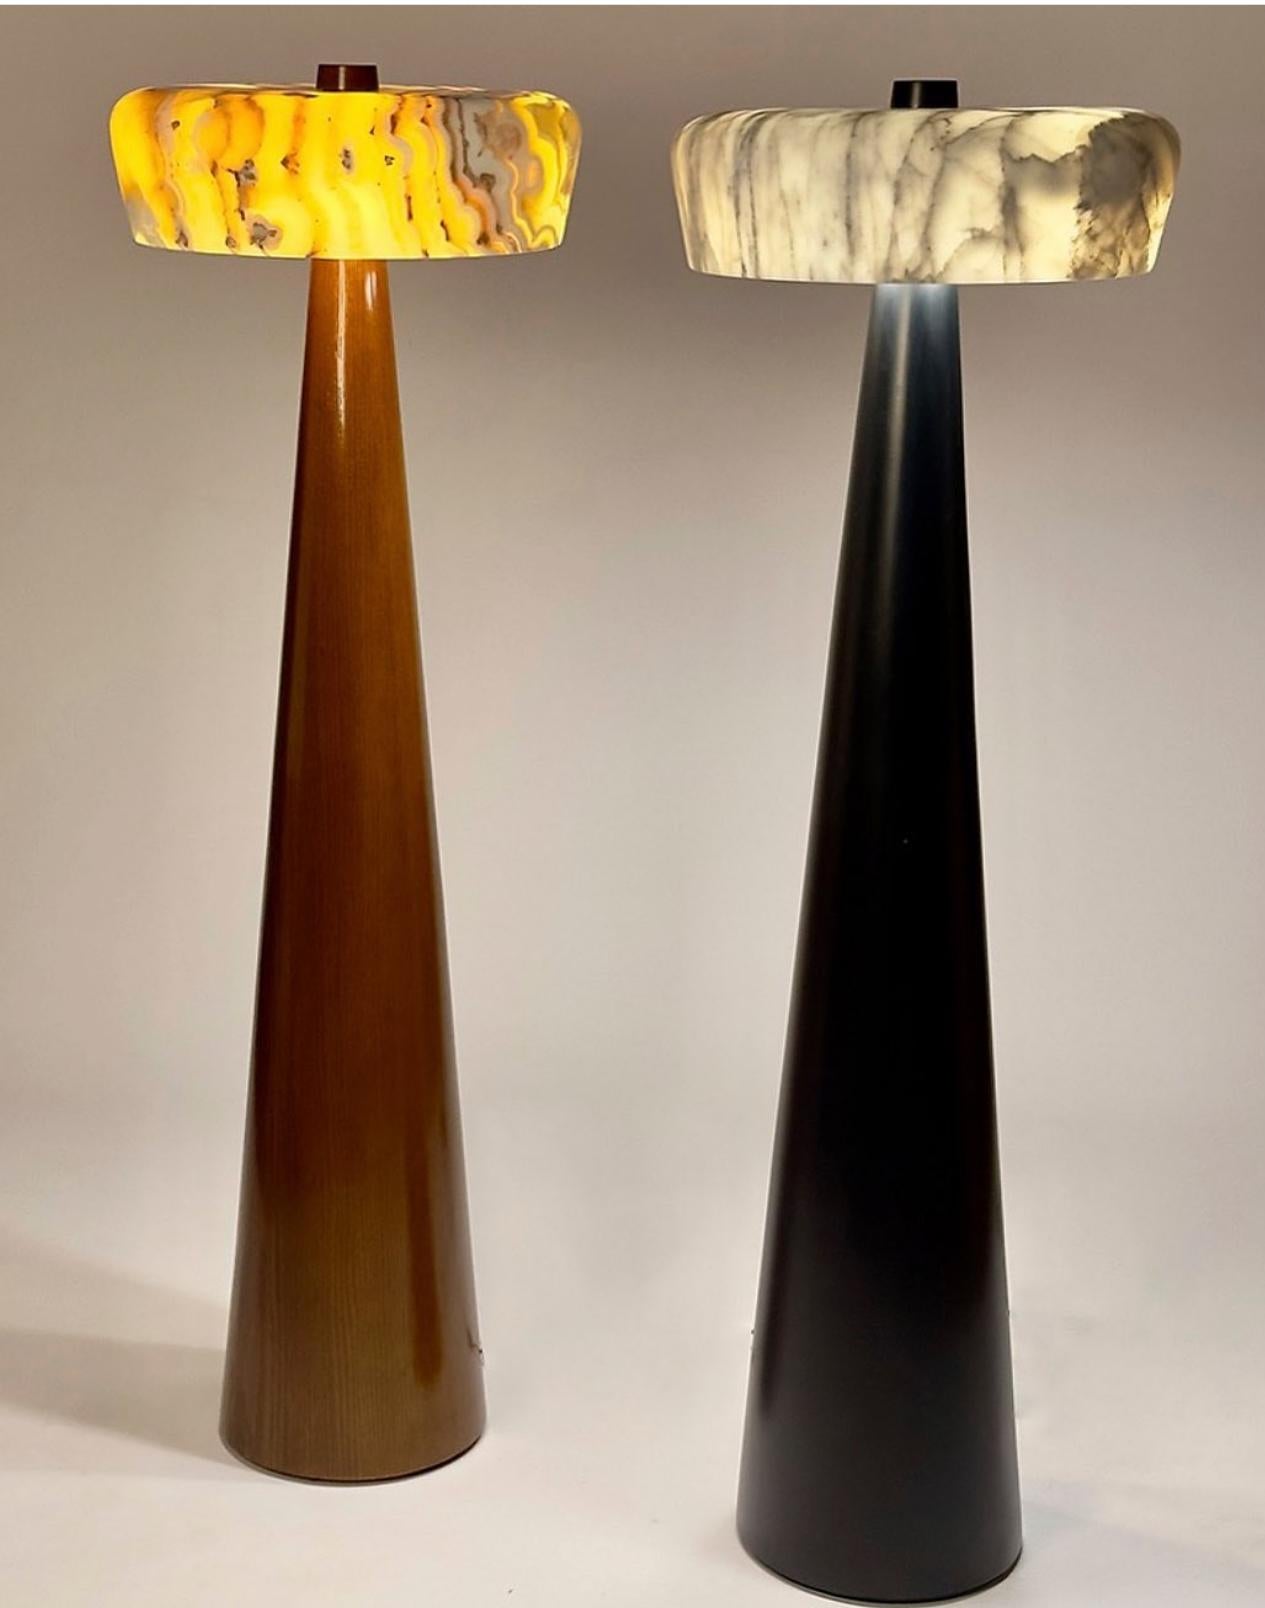 Blackened TOTEM floor lamp with. Carrara lampshade. Handmade in Egypt. For Sale